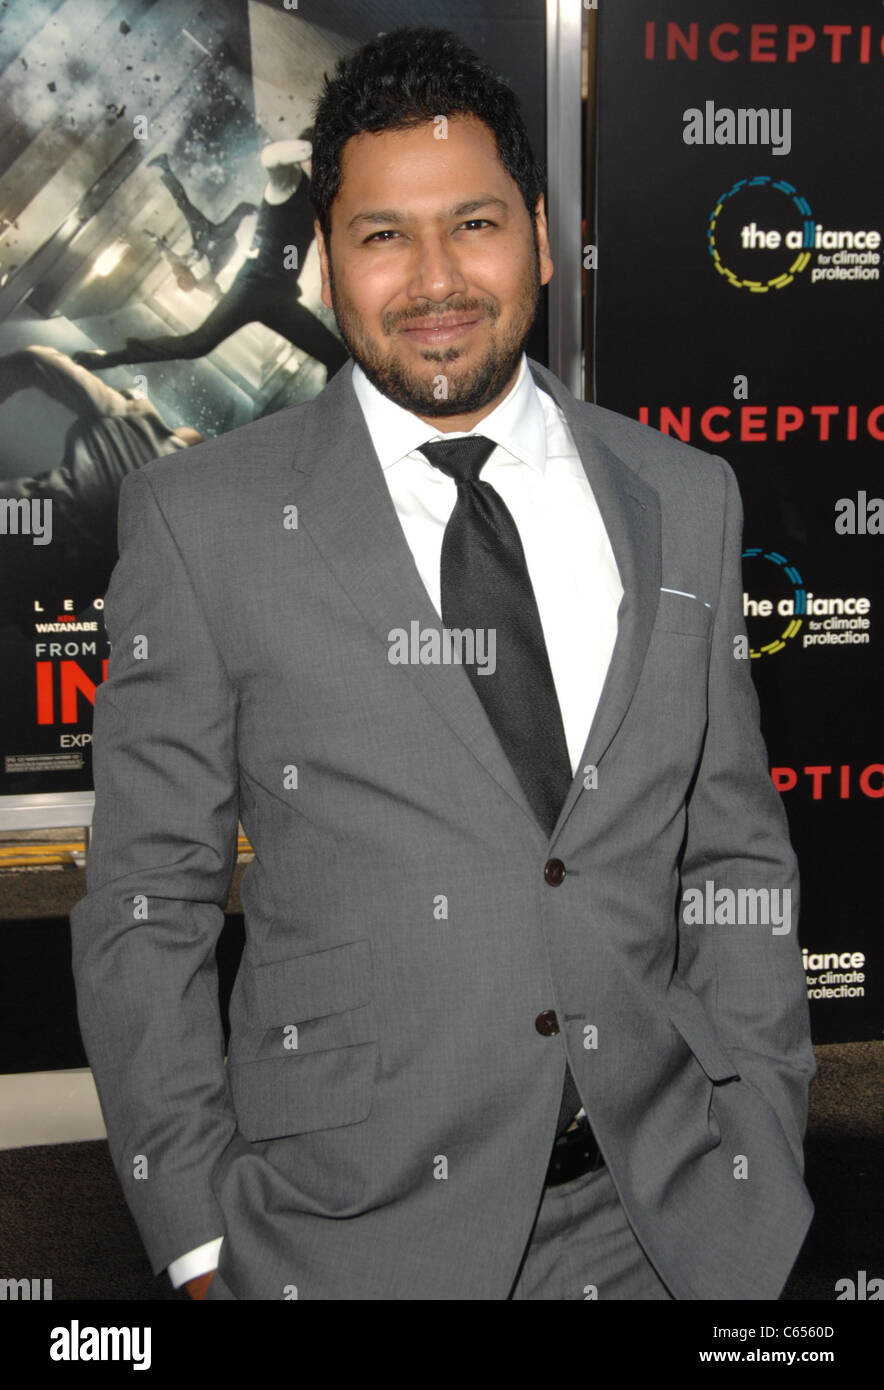 Dileep Rao at arrivals for INCEPTION Premiere, Grauman's Chinese Theatre, Los Angeles, CA July 13, 2010. Photo By: Dee Cercone/Everett Collection Stock Photo